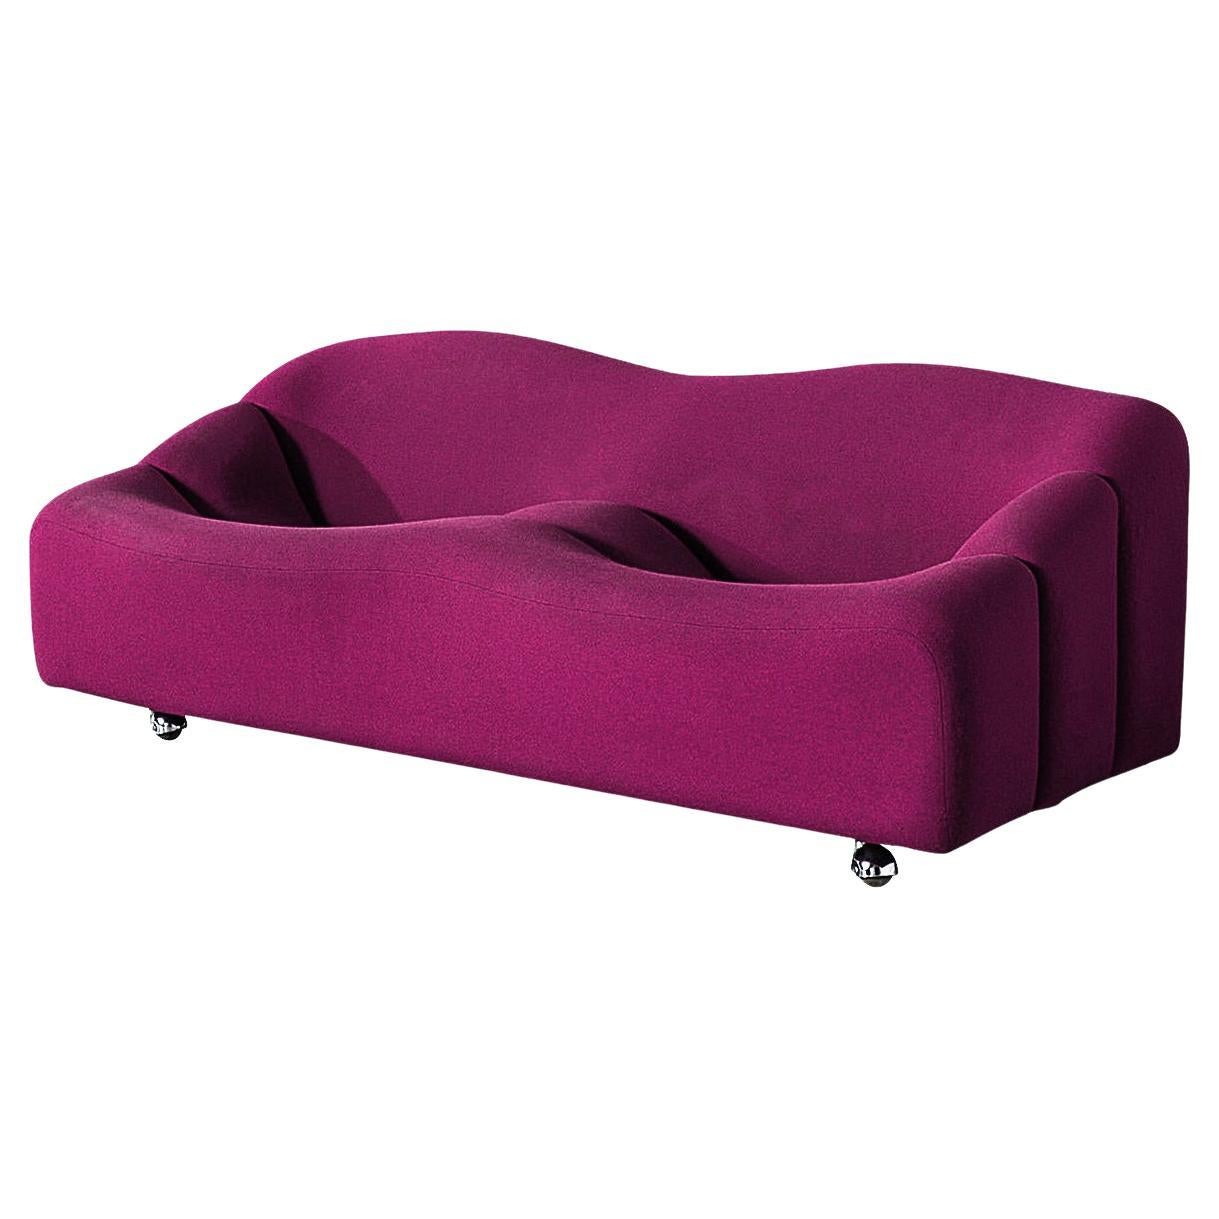 Pierre Paulin for Artifort ´ABCD´ Settee in Fuchsia Upholstery  For Sale